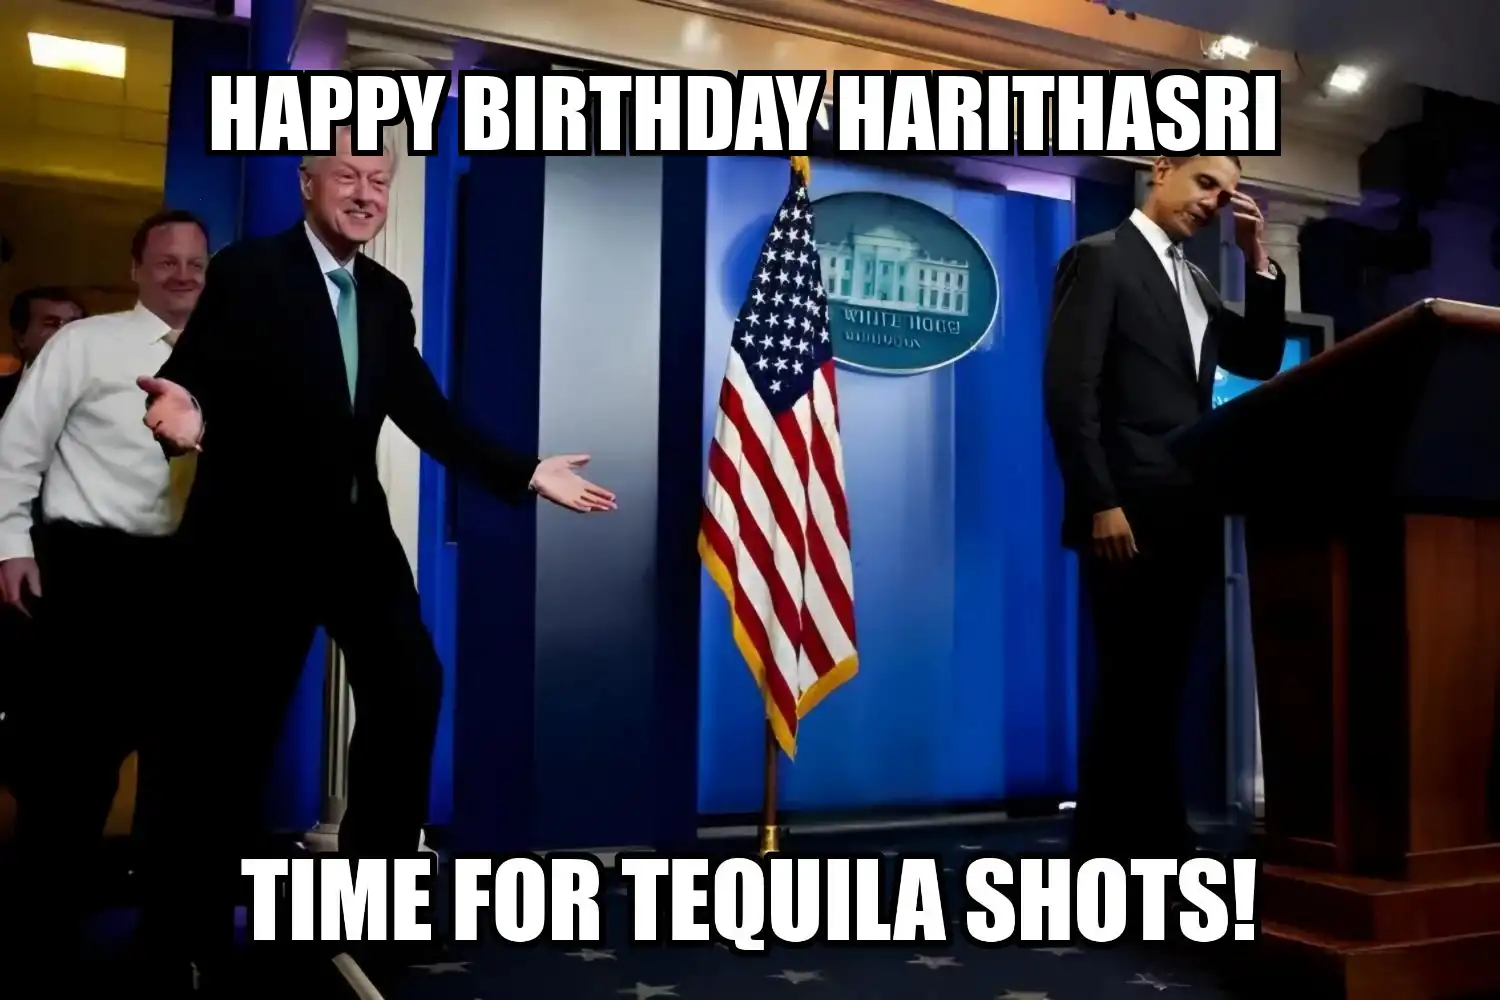 Happy Birthday Harithasri Time For Tequila Shots Memes